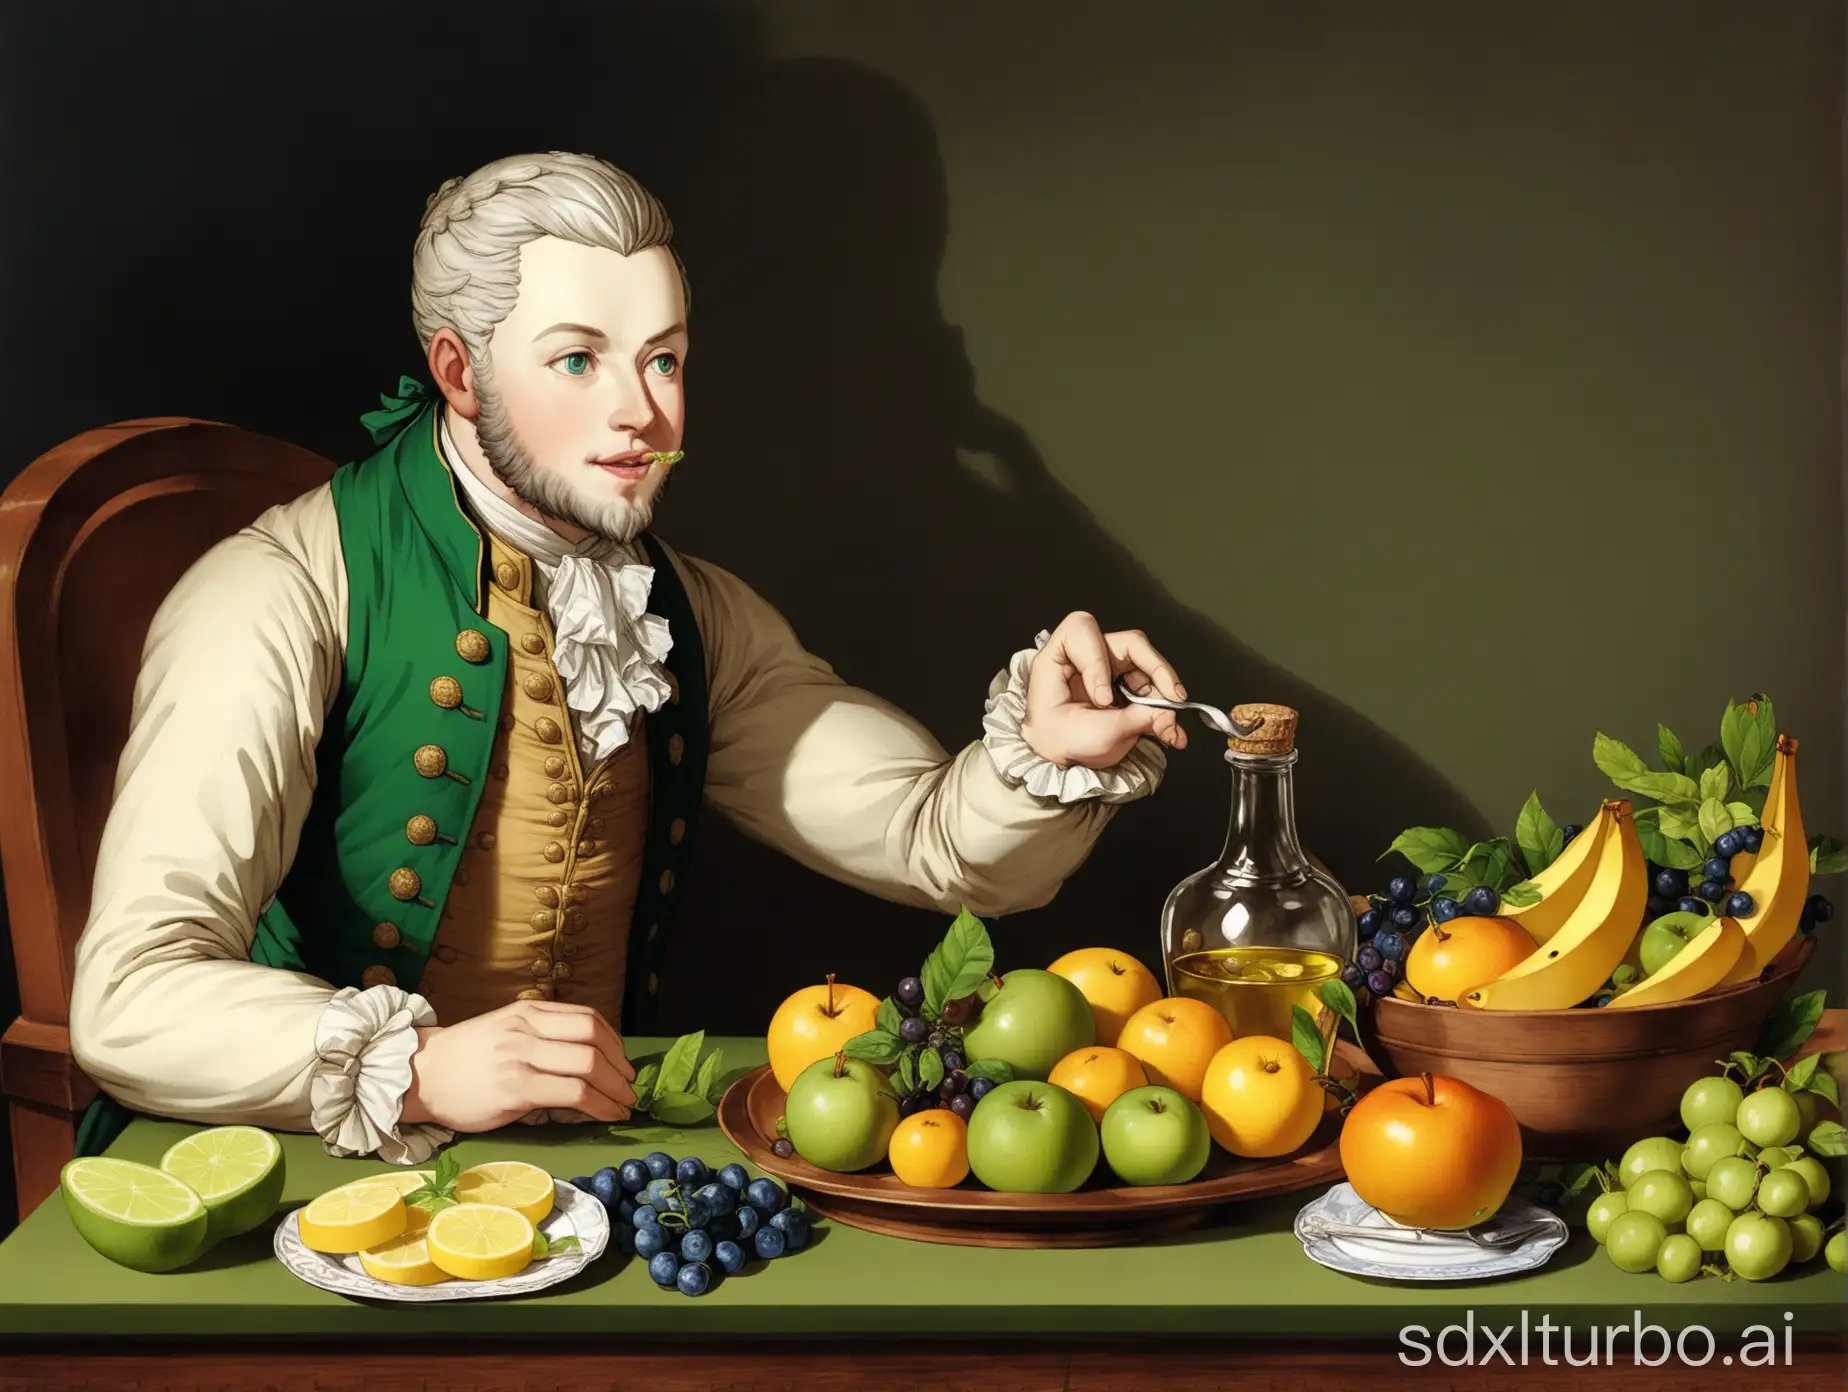 James-Linds-Discovery-Scurvy-Prevention-through-Diet